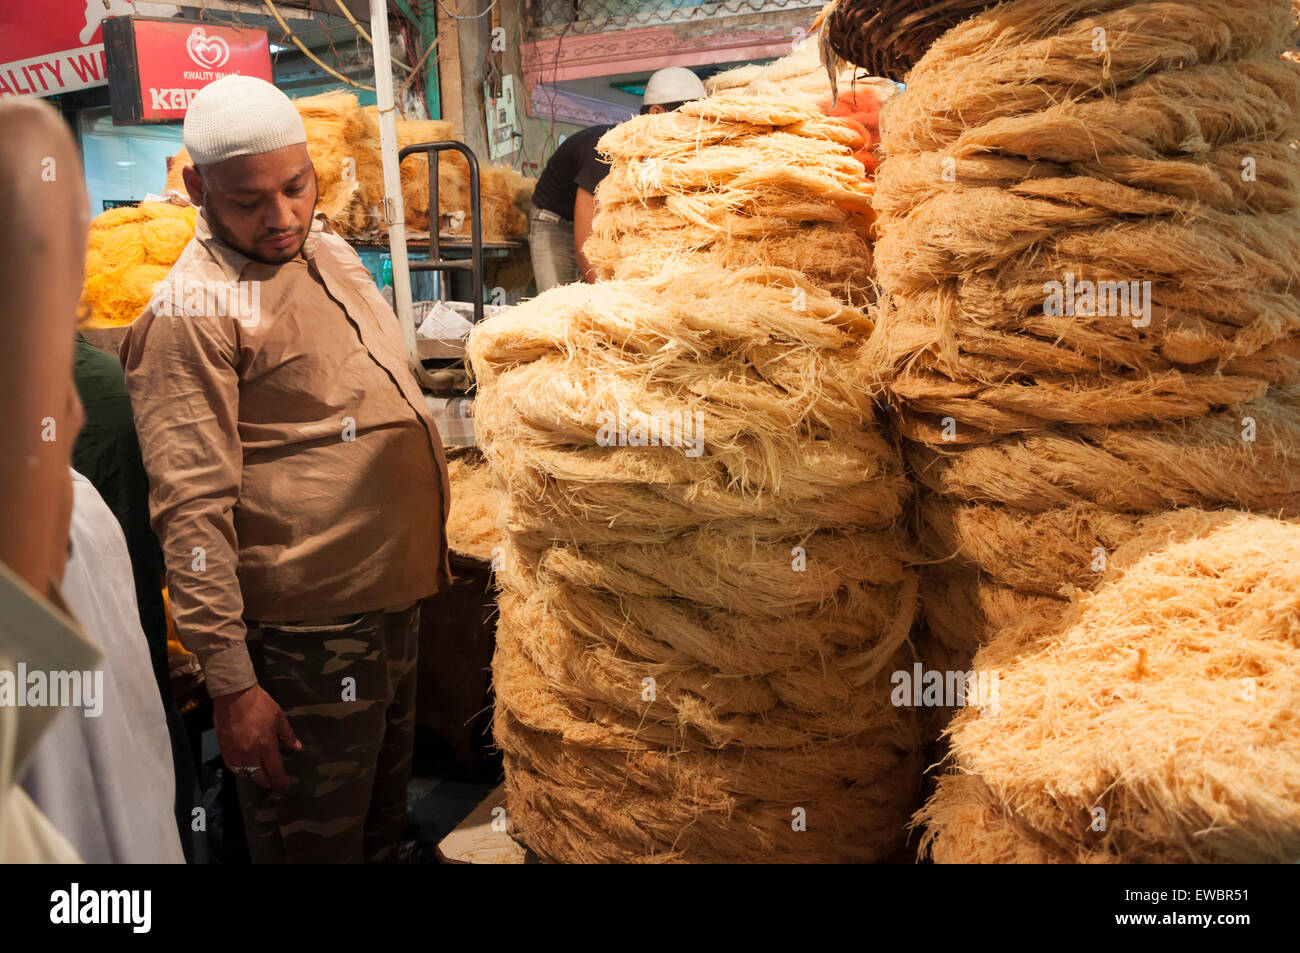 A shop selling seviyan (vermicelli) during Ramadan in Chandni Chowk, Old Delhi, India. Stock Photo